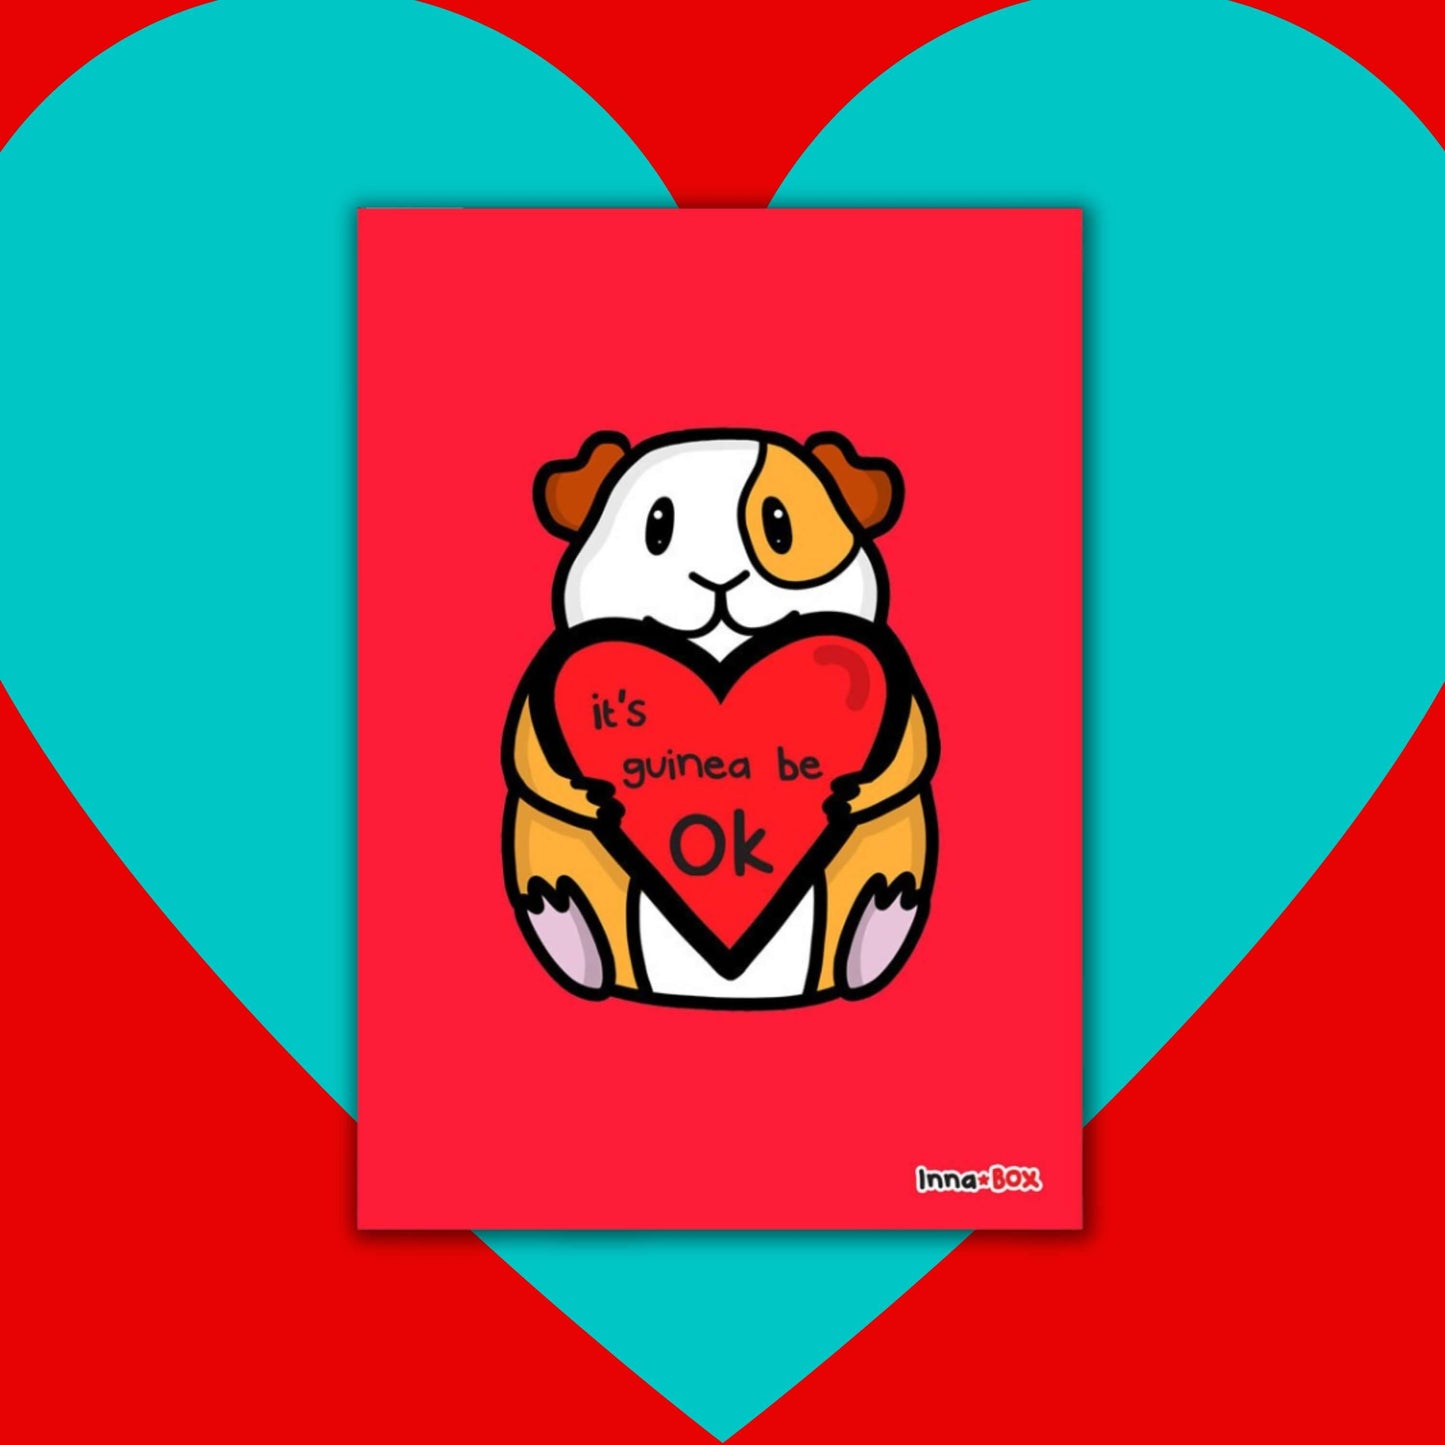 The It's Gonna Be OK Guinea Pig Postcard on a red and blue background. The red postcard print features a cute orange and white smiling guinea pig sat holding a red heart with black text reading 'it's guinea be ok'. The hand drawn design is a reminder for staying positive.